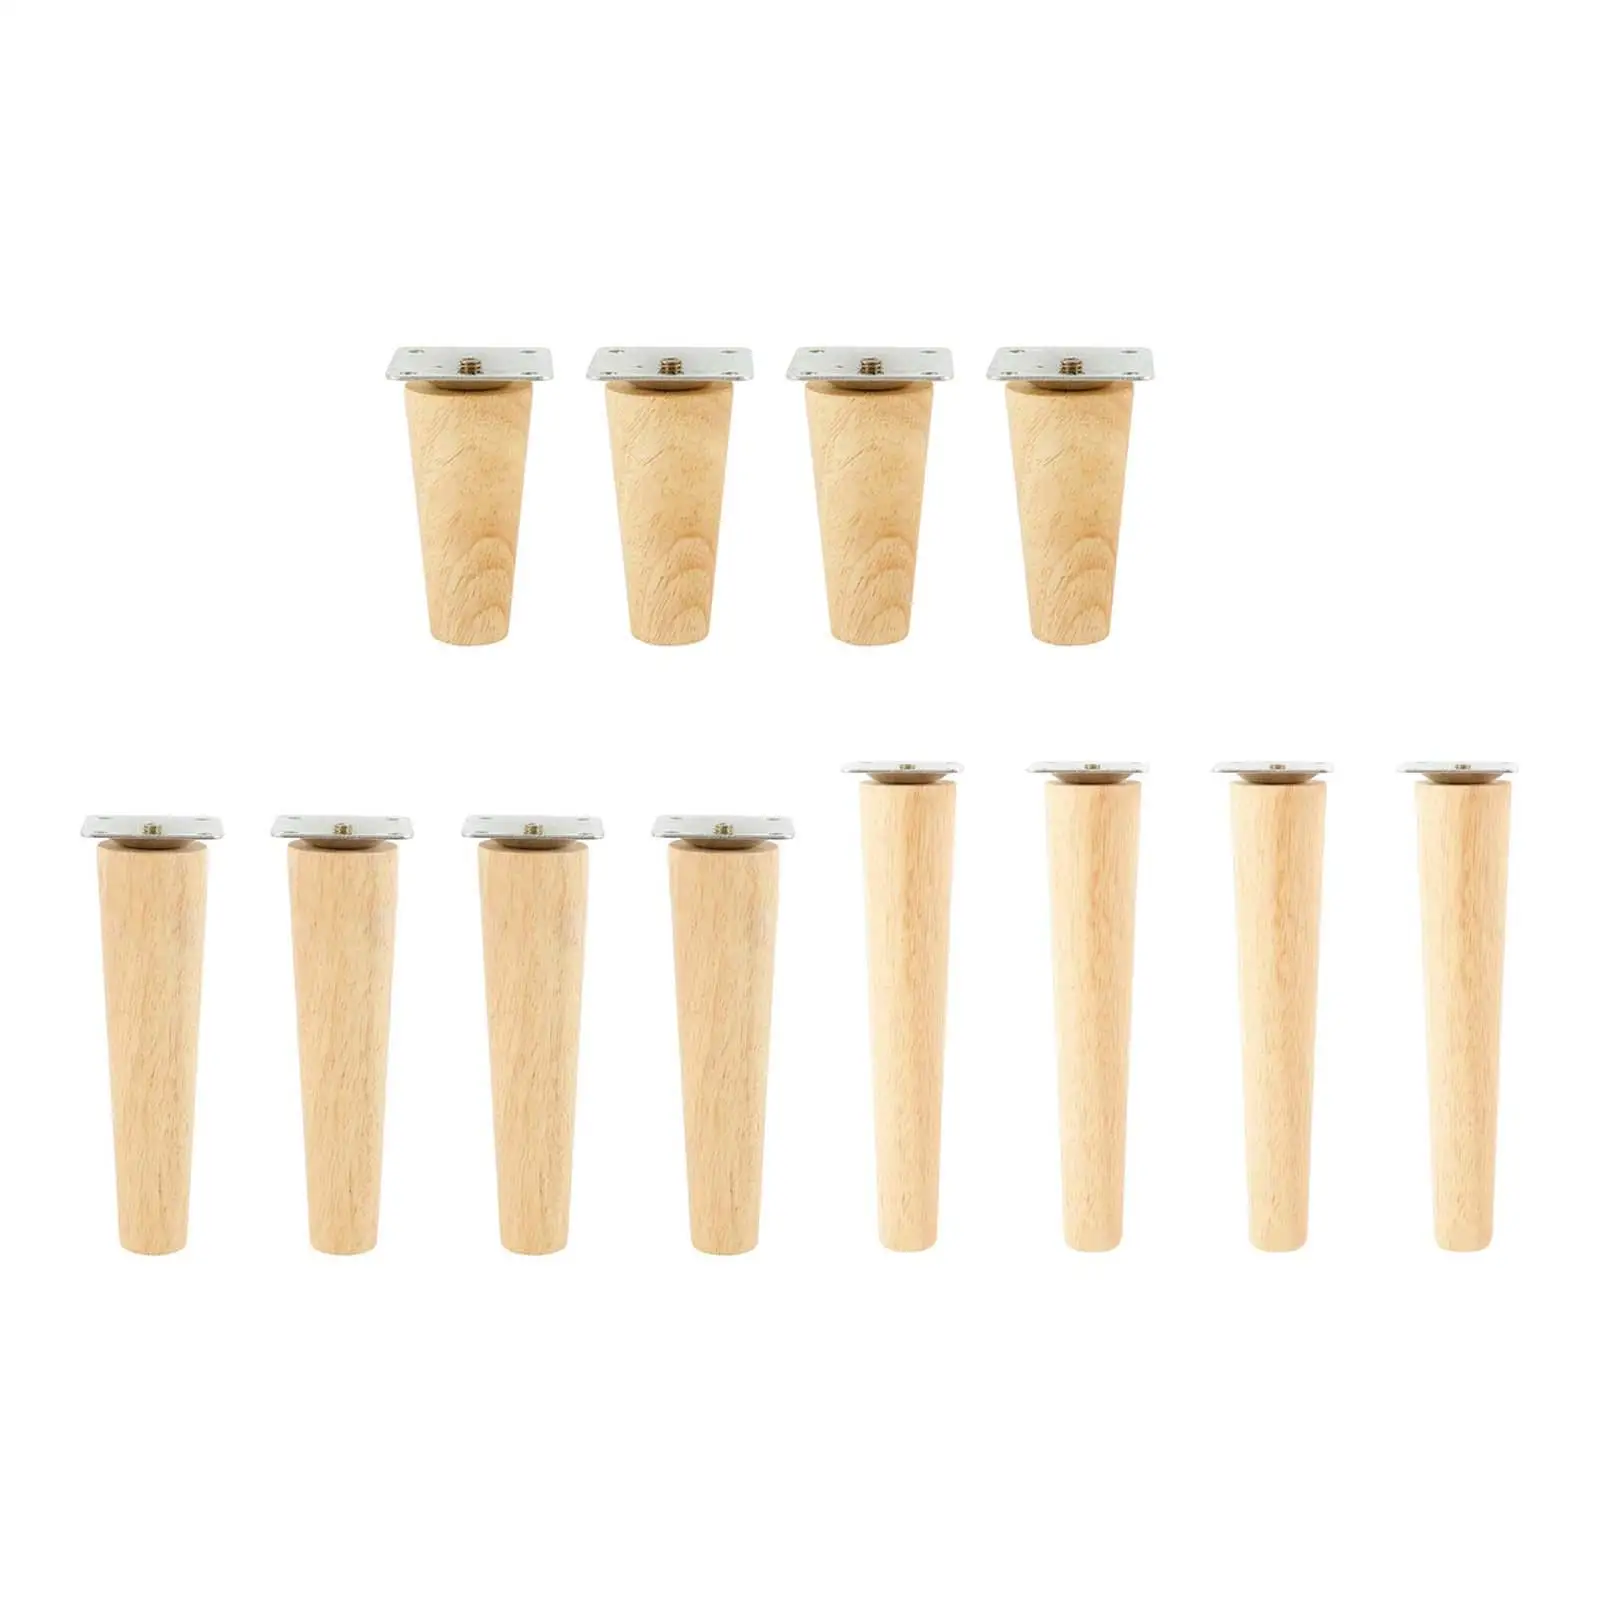 4 Pieces Wooden Furniture Leg Fashion Lightweight Multipurpose Sturdy Chair Legs DIY for Chair Table Cupboard Shelves Couch